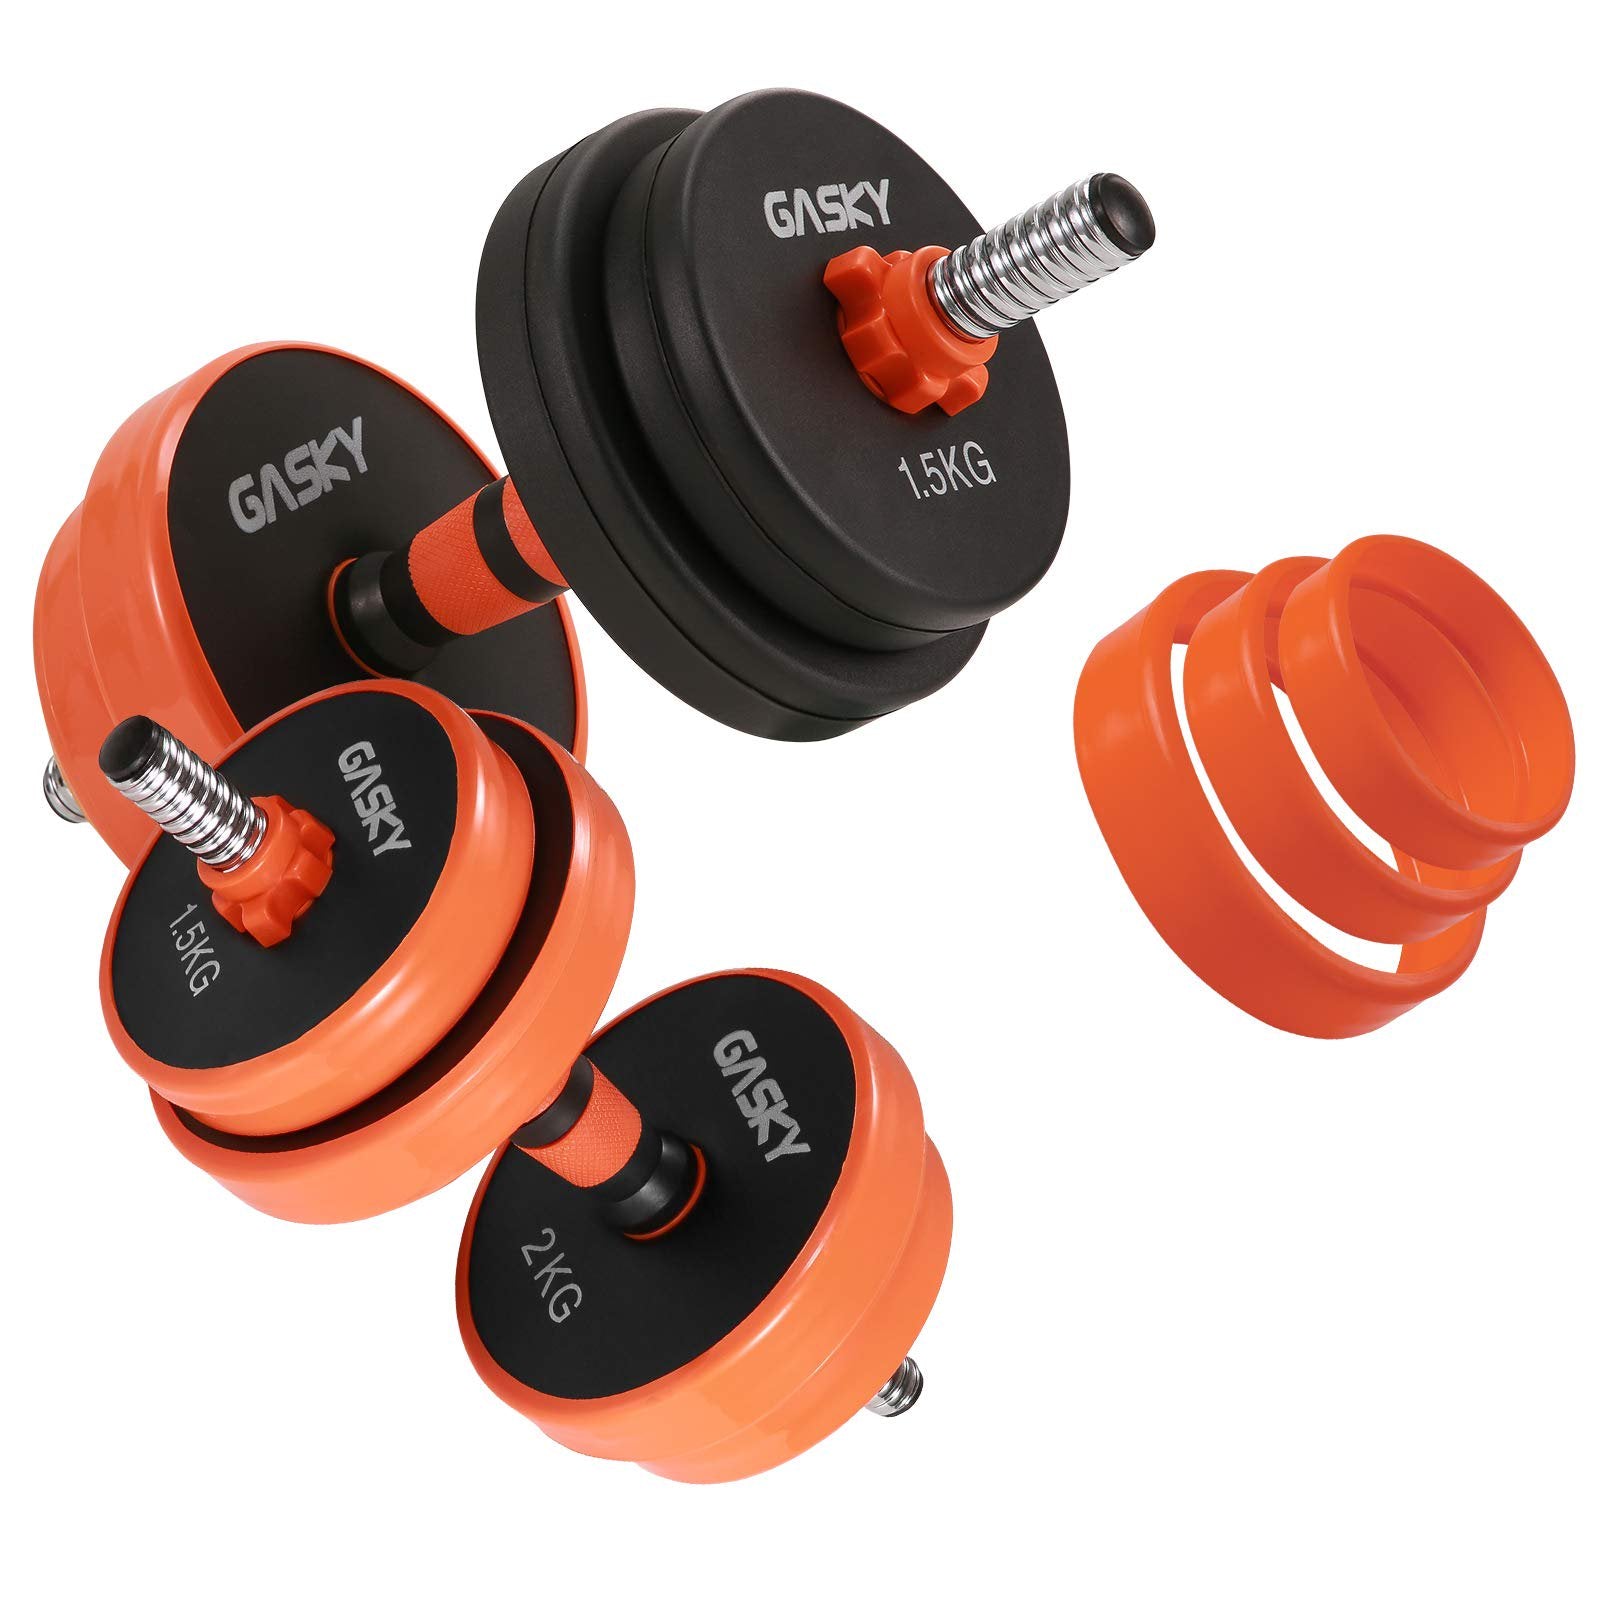 Load image into Gallery viewer, Adjustable Barbell Dumbbell Weights Set 33LB, Non-Slip Solid Basics Exercise Fitness Dumbbells for Home Gym Use
